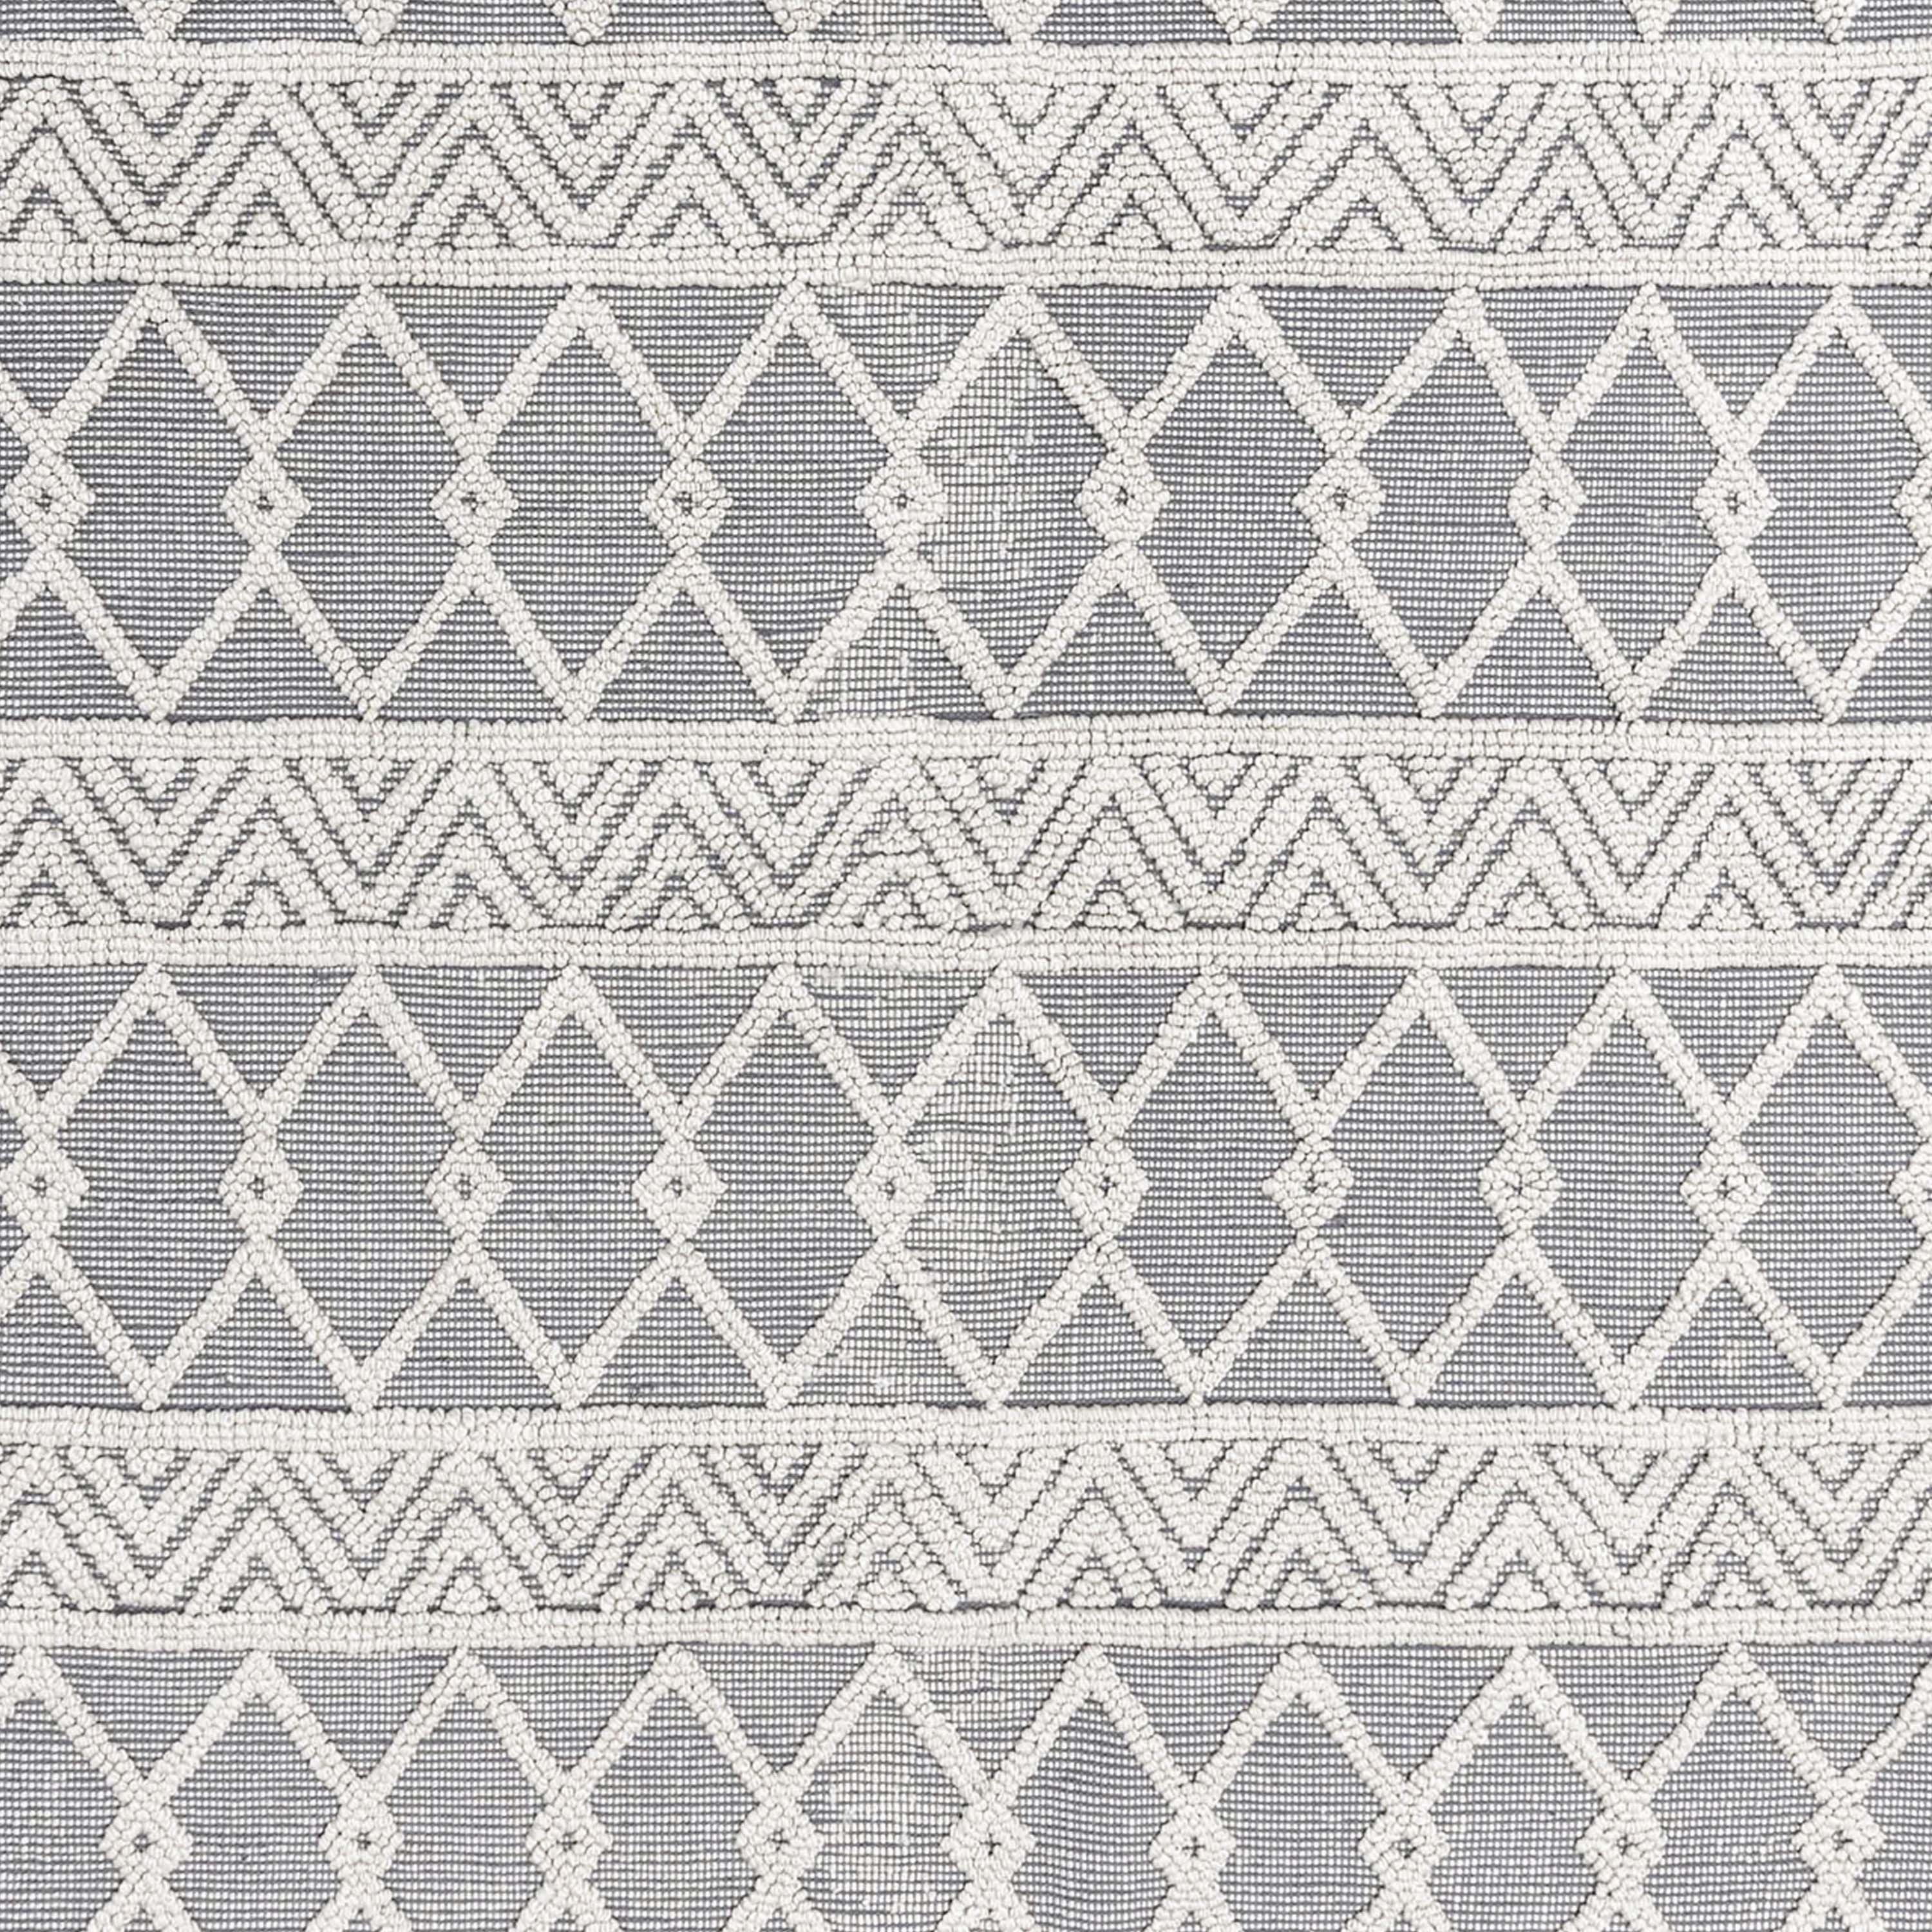 Indoor Geometric Area Rug - Hand Woven Area Rug with Diamond Pattern, Polyester/Cotton Blend-Area Rug-Flash Furniture-Wall2Wall Furnishings